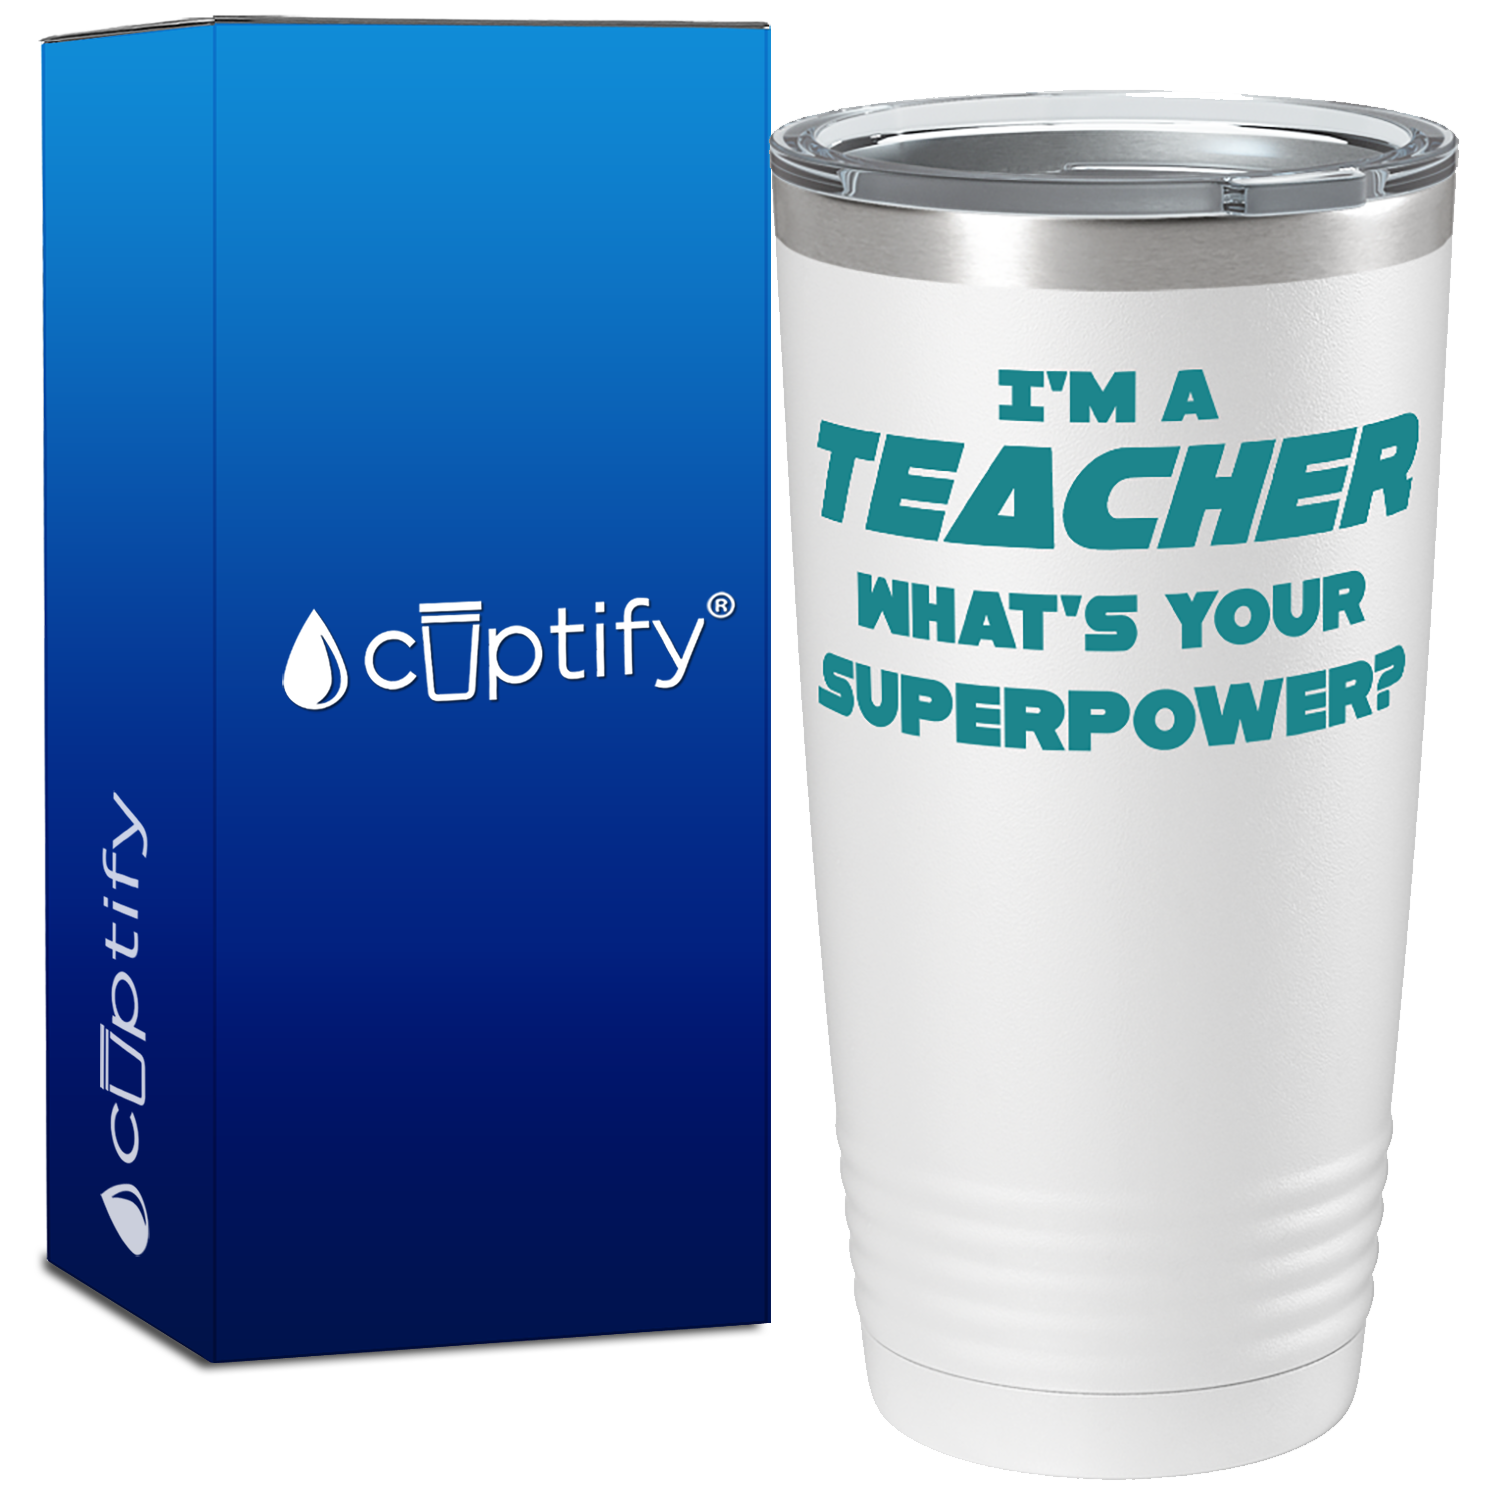 I'm a Teacher What's Your Superpower? on 20oz Tumbler